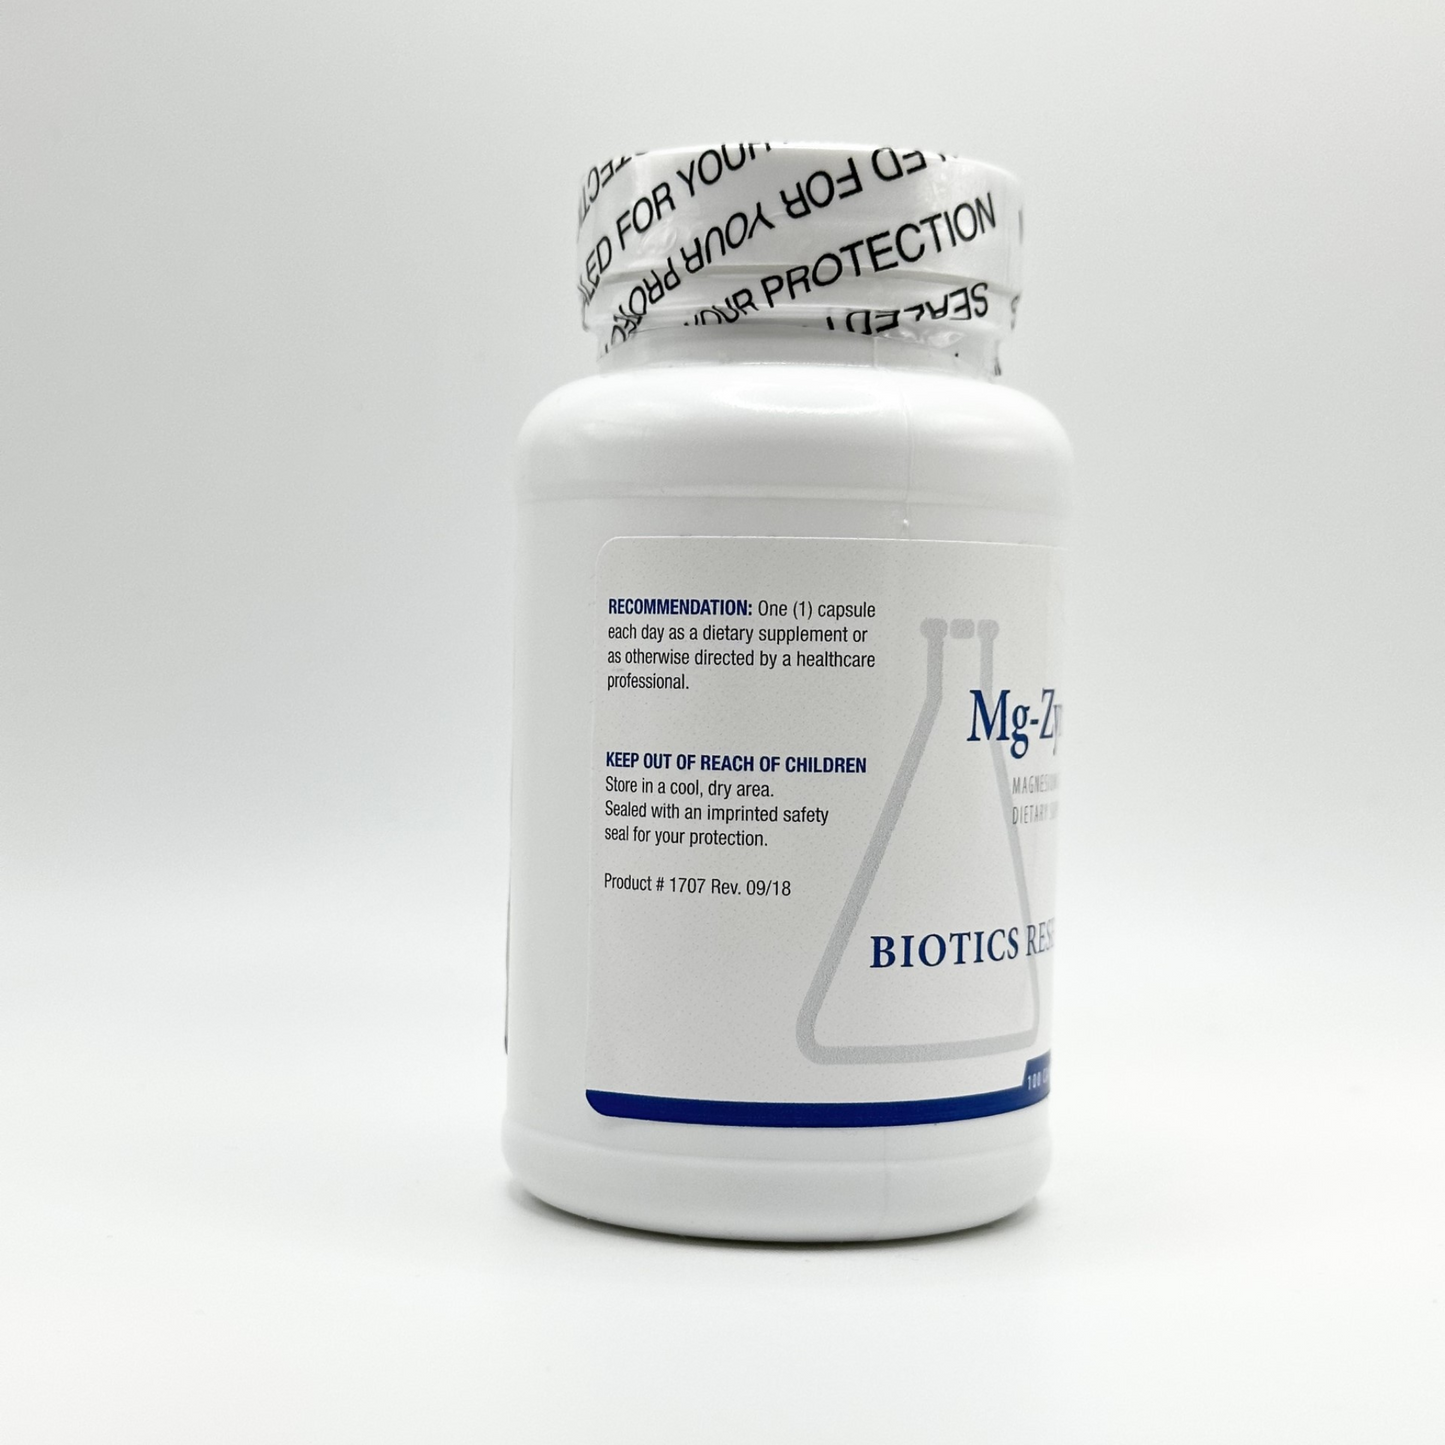 (MG-Zyme) 100ct